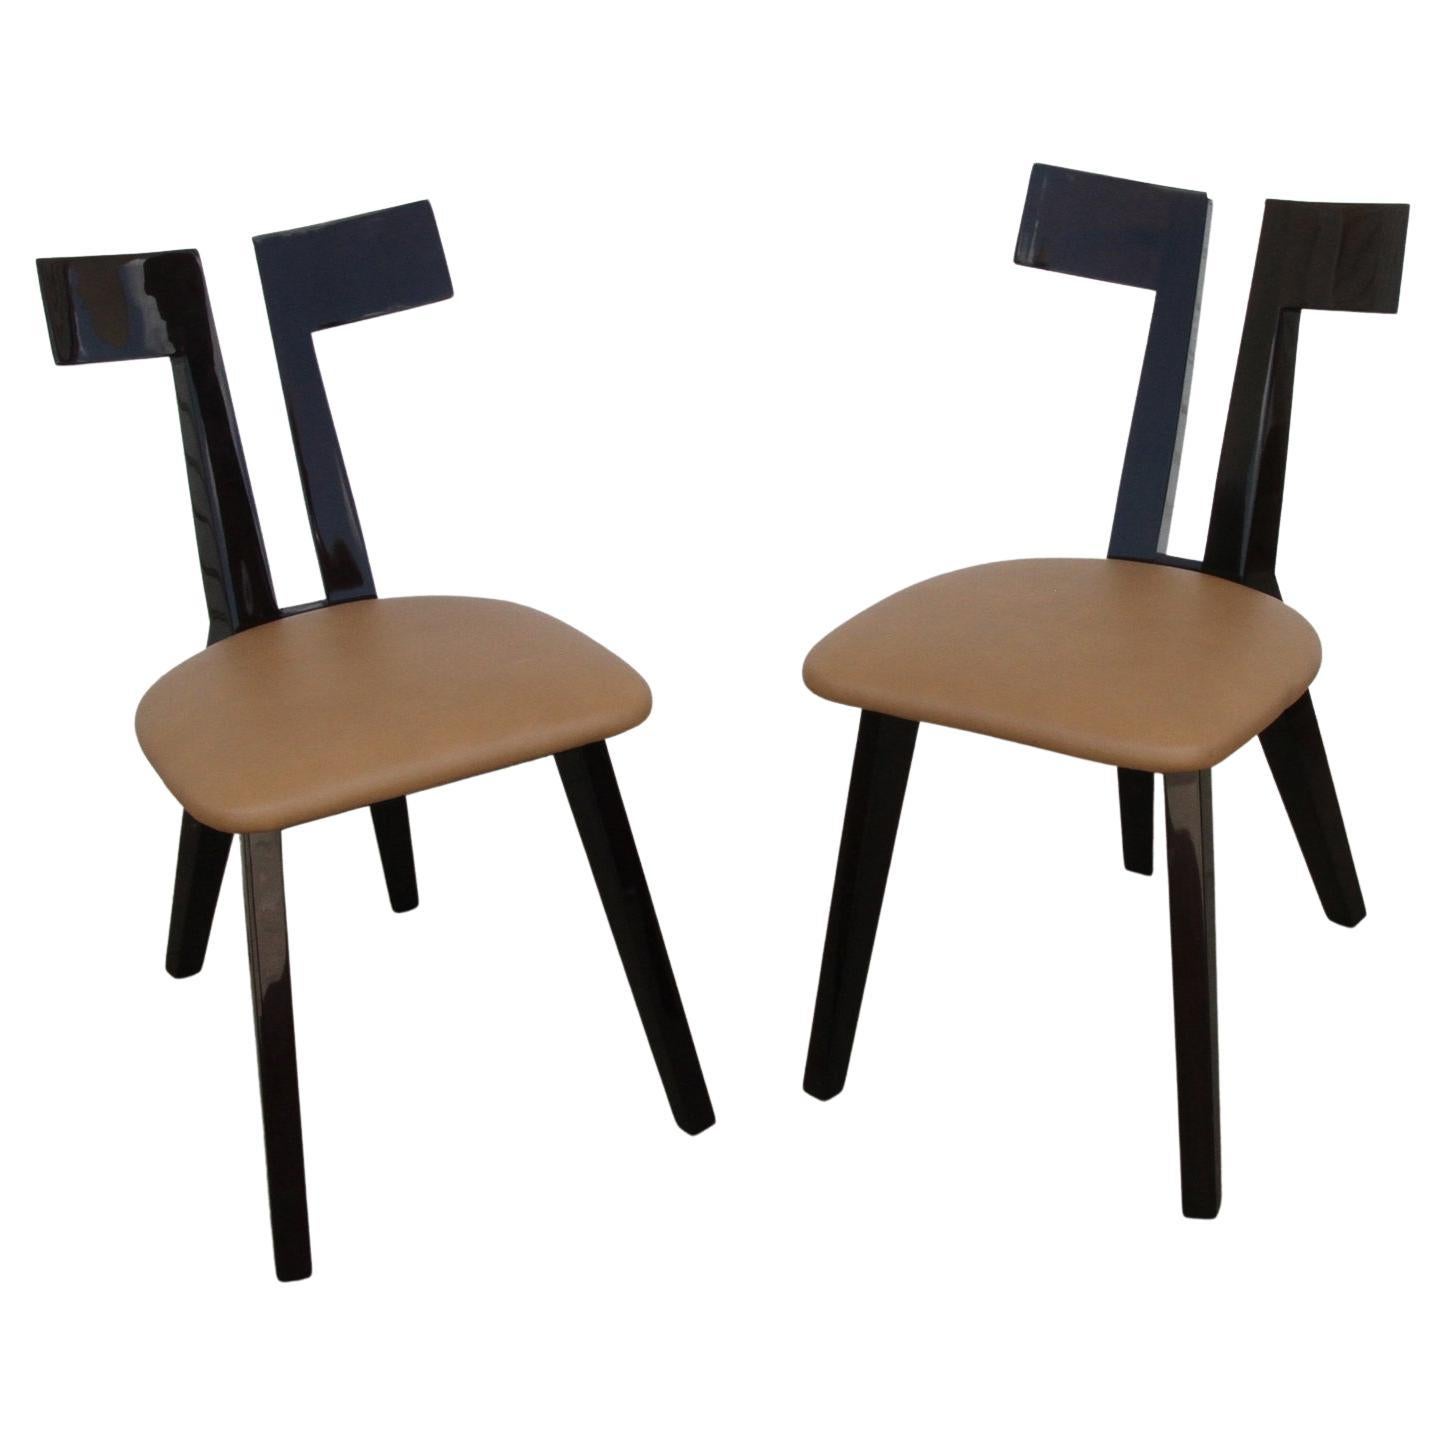 Pair of Amlash chairs by Mirak

A. Soudavar
Designer
 
 
Side chair in dark expresso mahogany with open back with small metal detail.
 
Dimensions
16” W x 31-1/4” H x 19” Seat x 16” Seat depth.